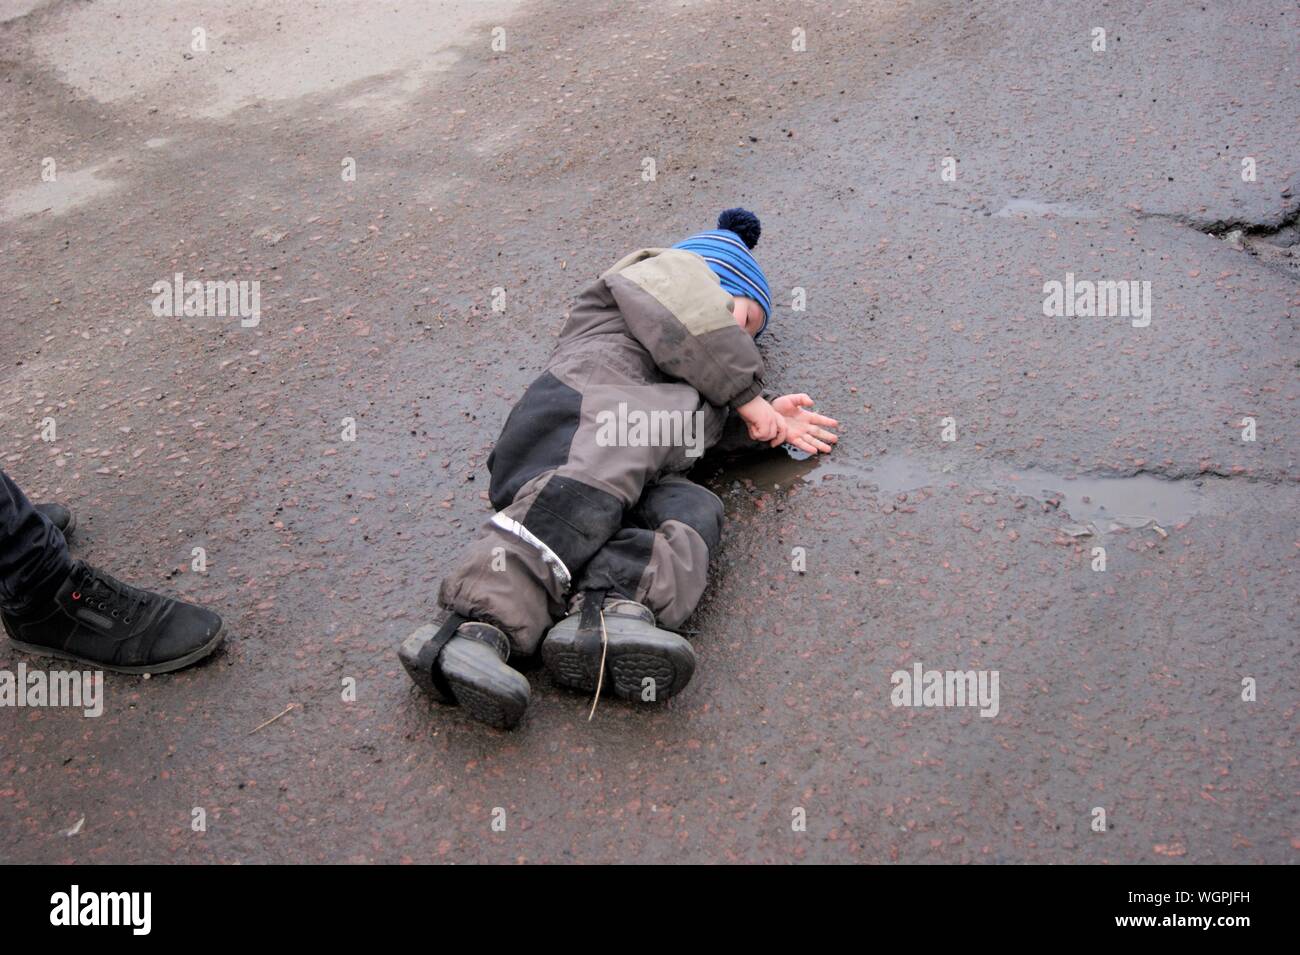 Children's caprice - a little boy lay down on the asphalt to express his protest and disagreement with the parent Stock Photo